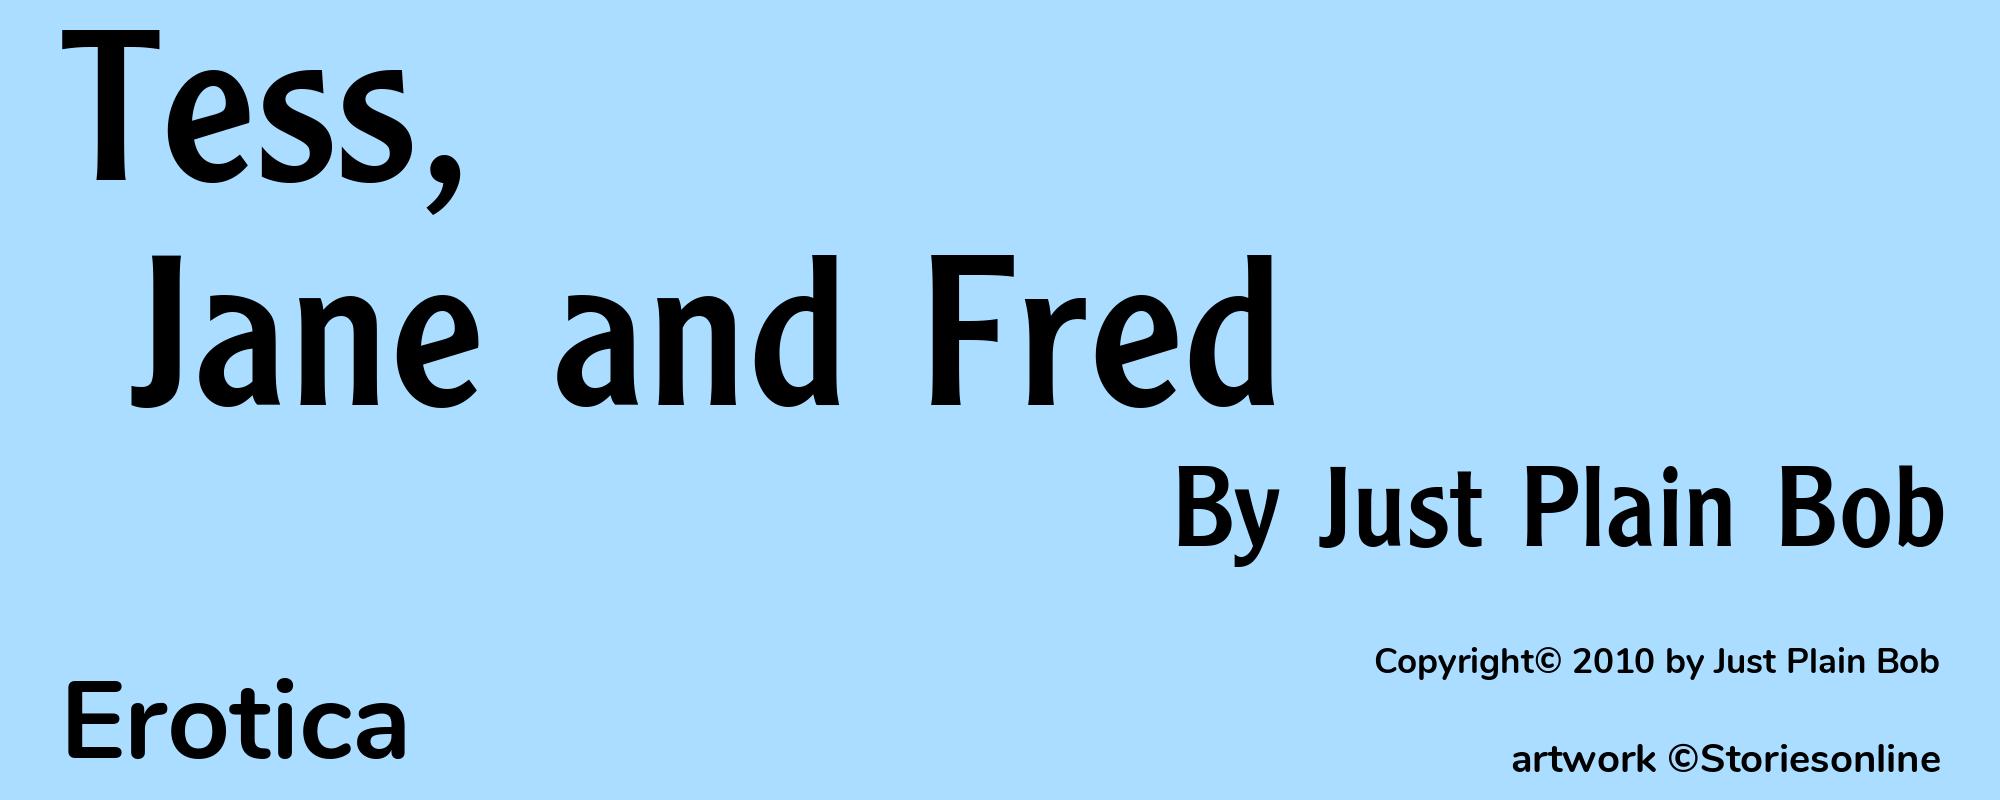 Tess, Jane and Fred - Cover